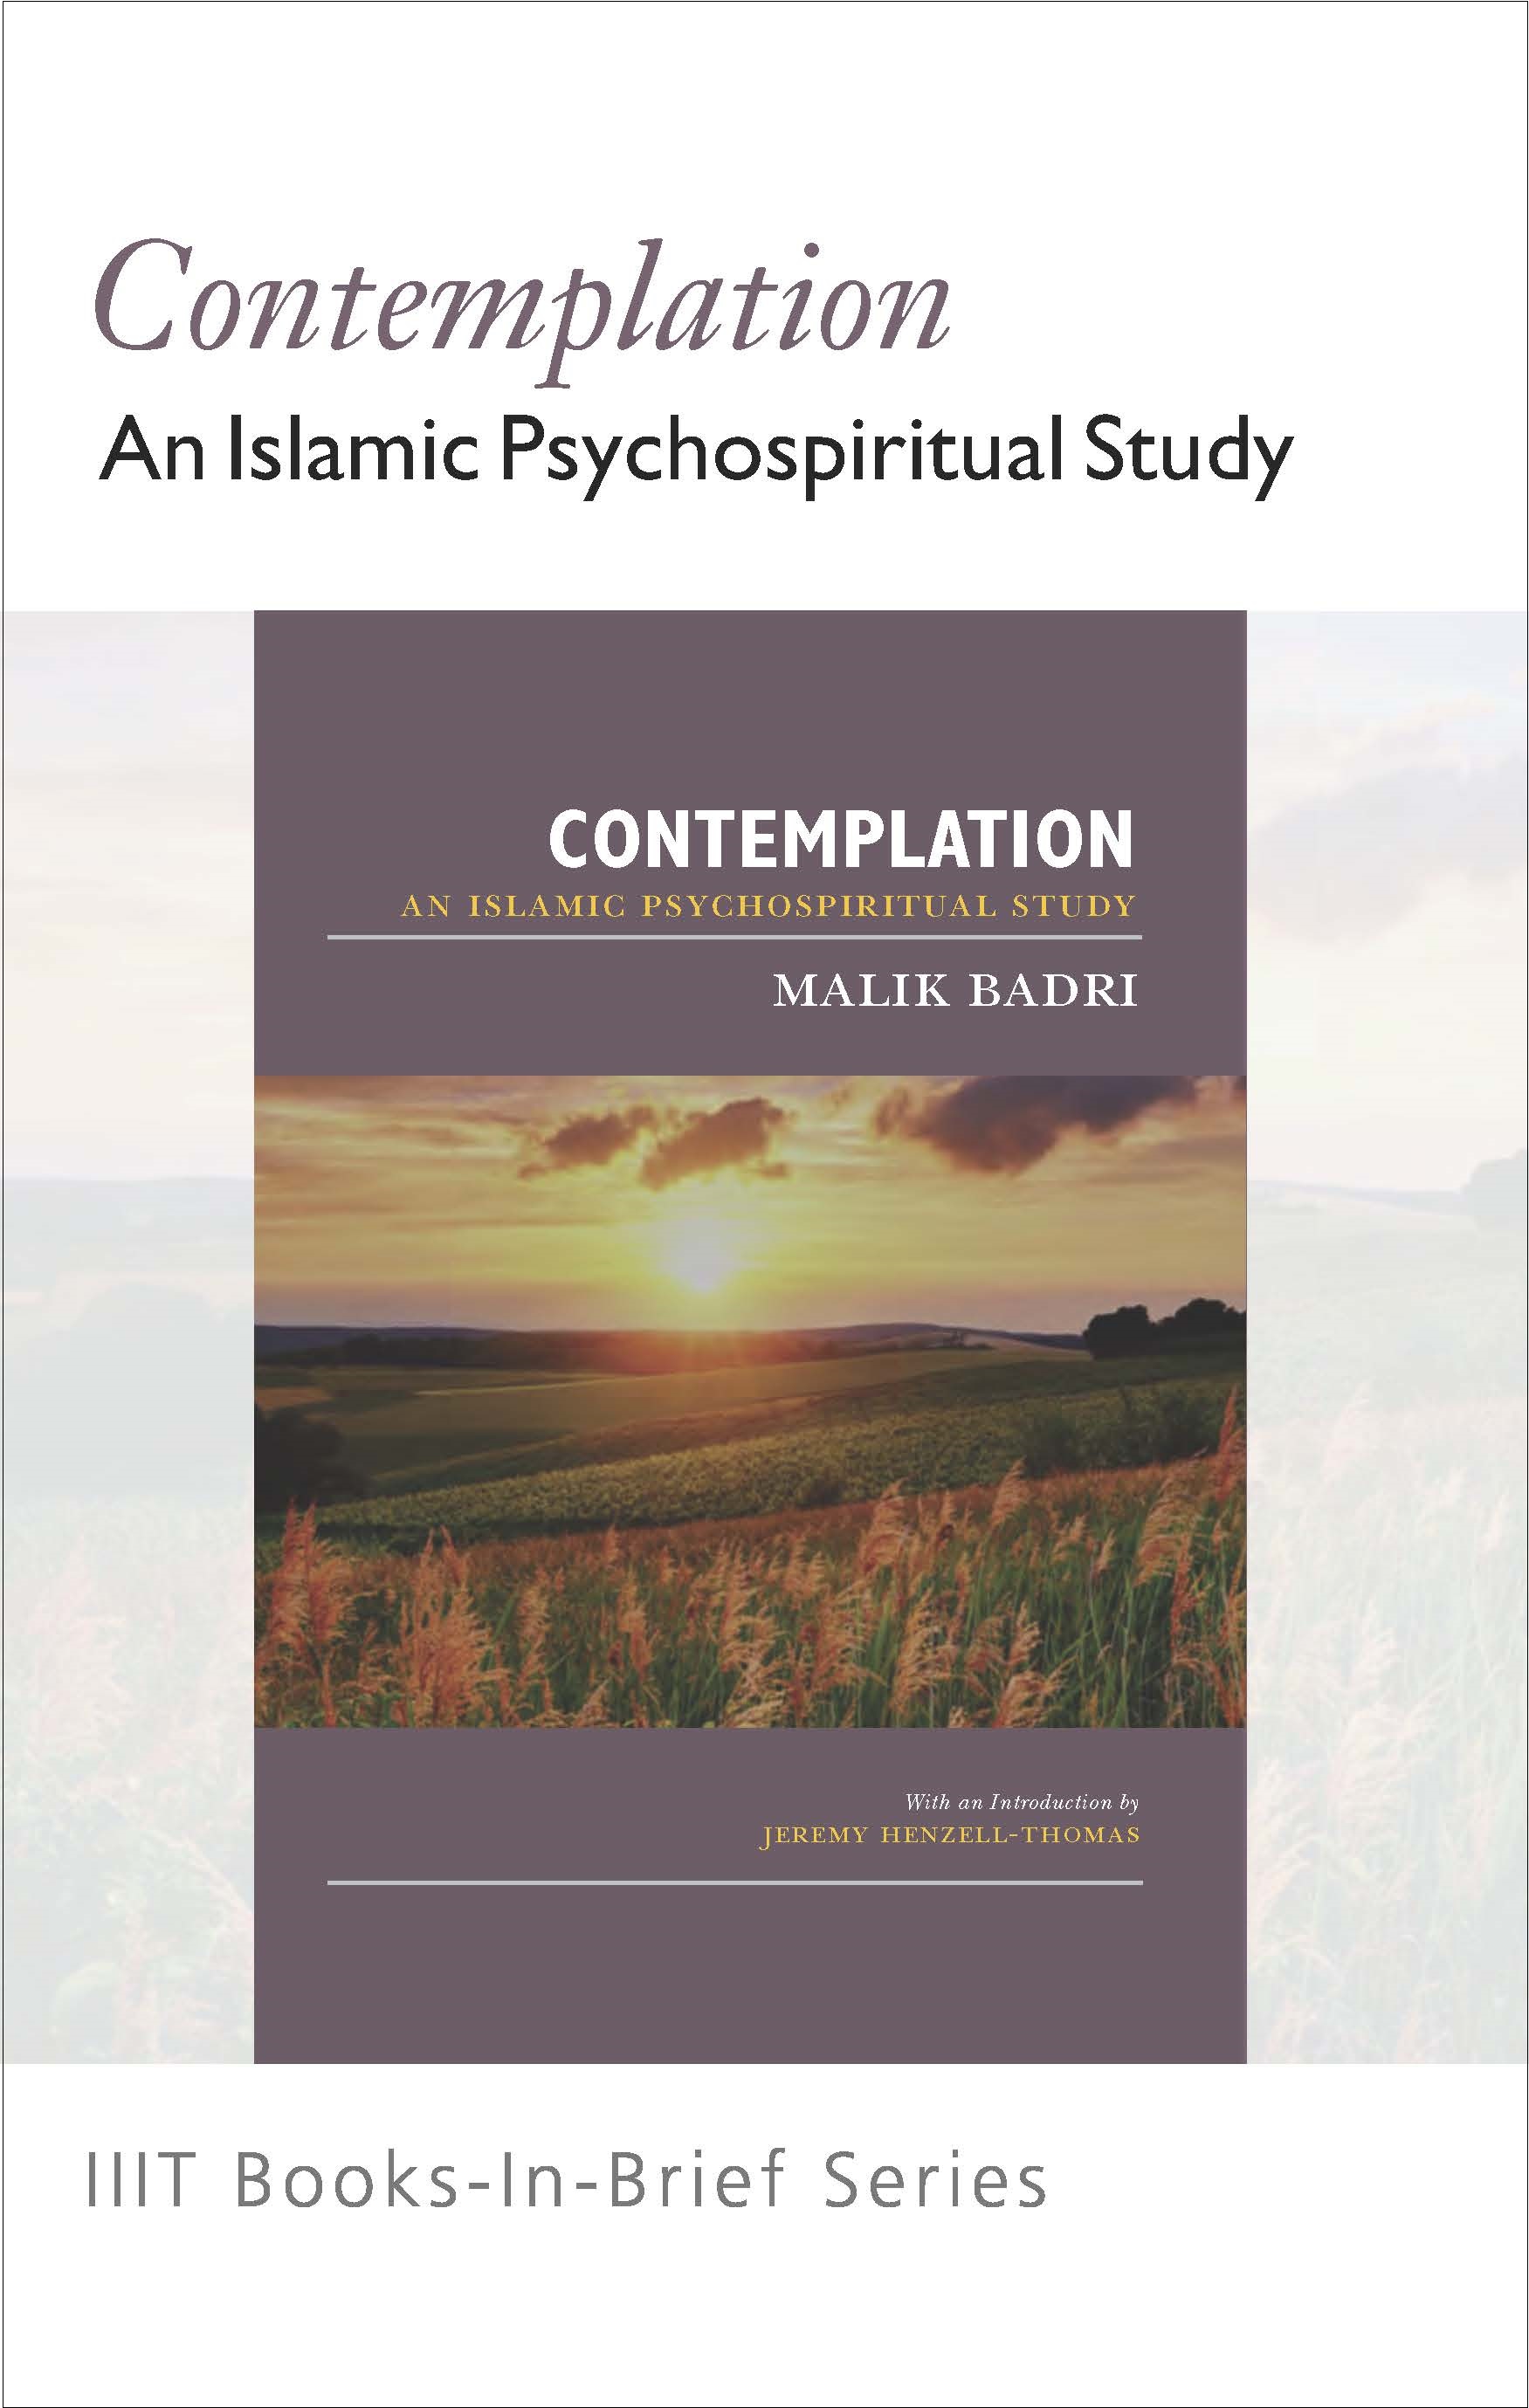 Books-in-Brief: Contemplation: An Islamic Psychospiritual Study (New Edition)